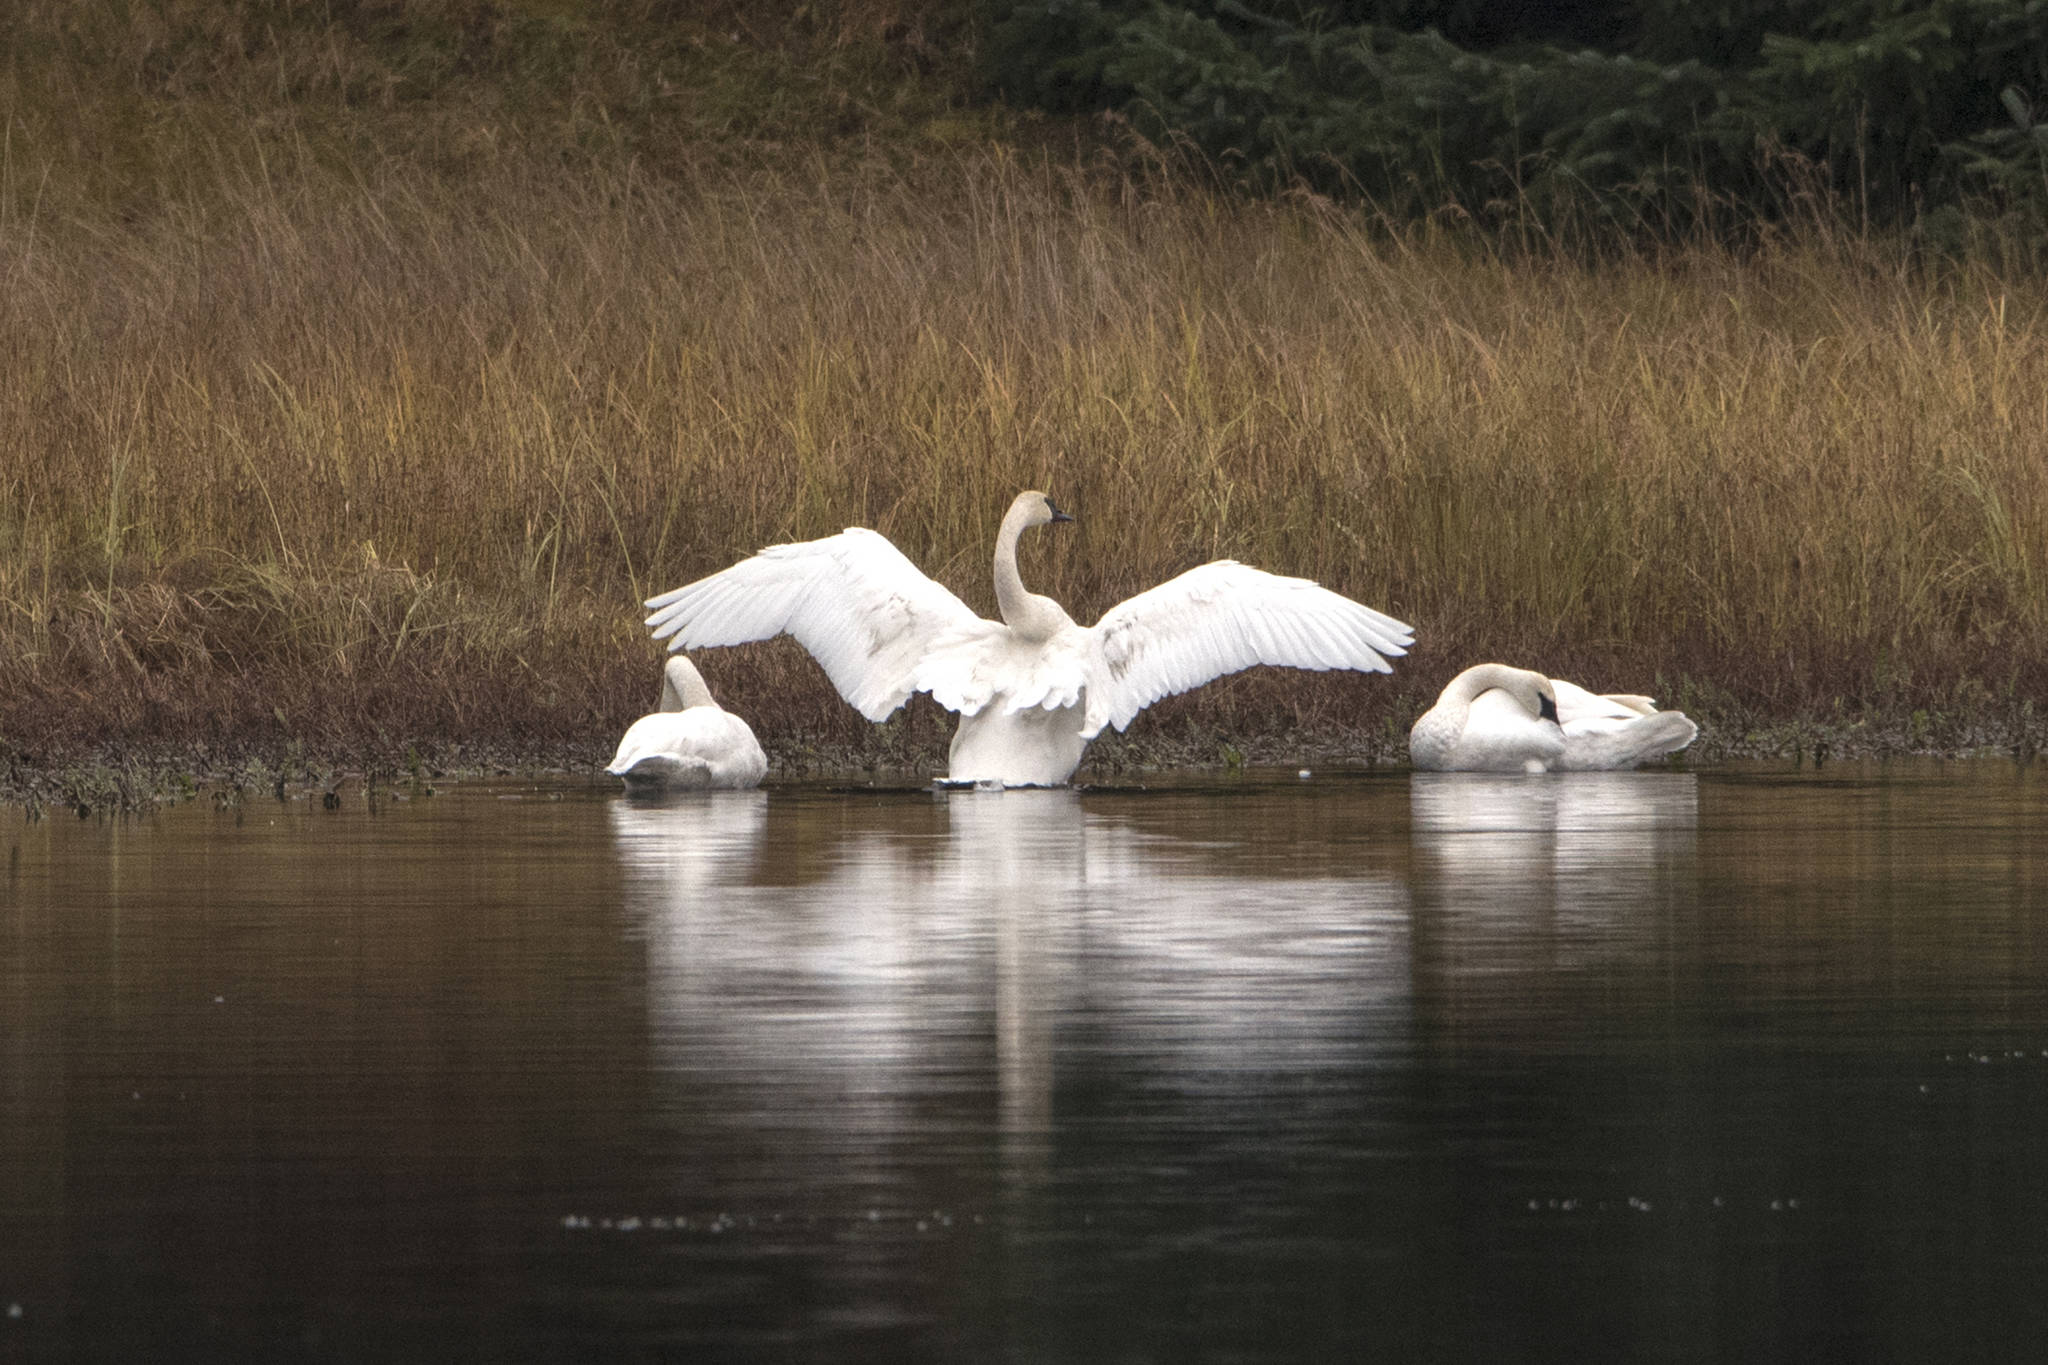 Three trumpeter Swans in peterson Creek pond by Amalga Harbor on Oct. 10. (Courtesy Photo / Kenneth Gill, gillfoto)